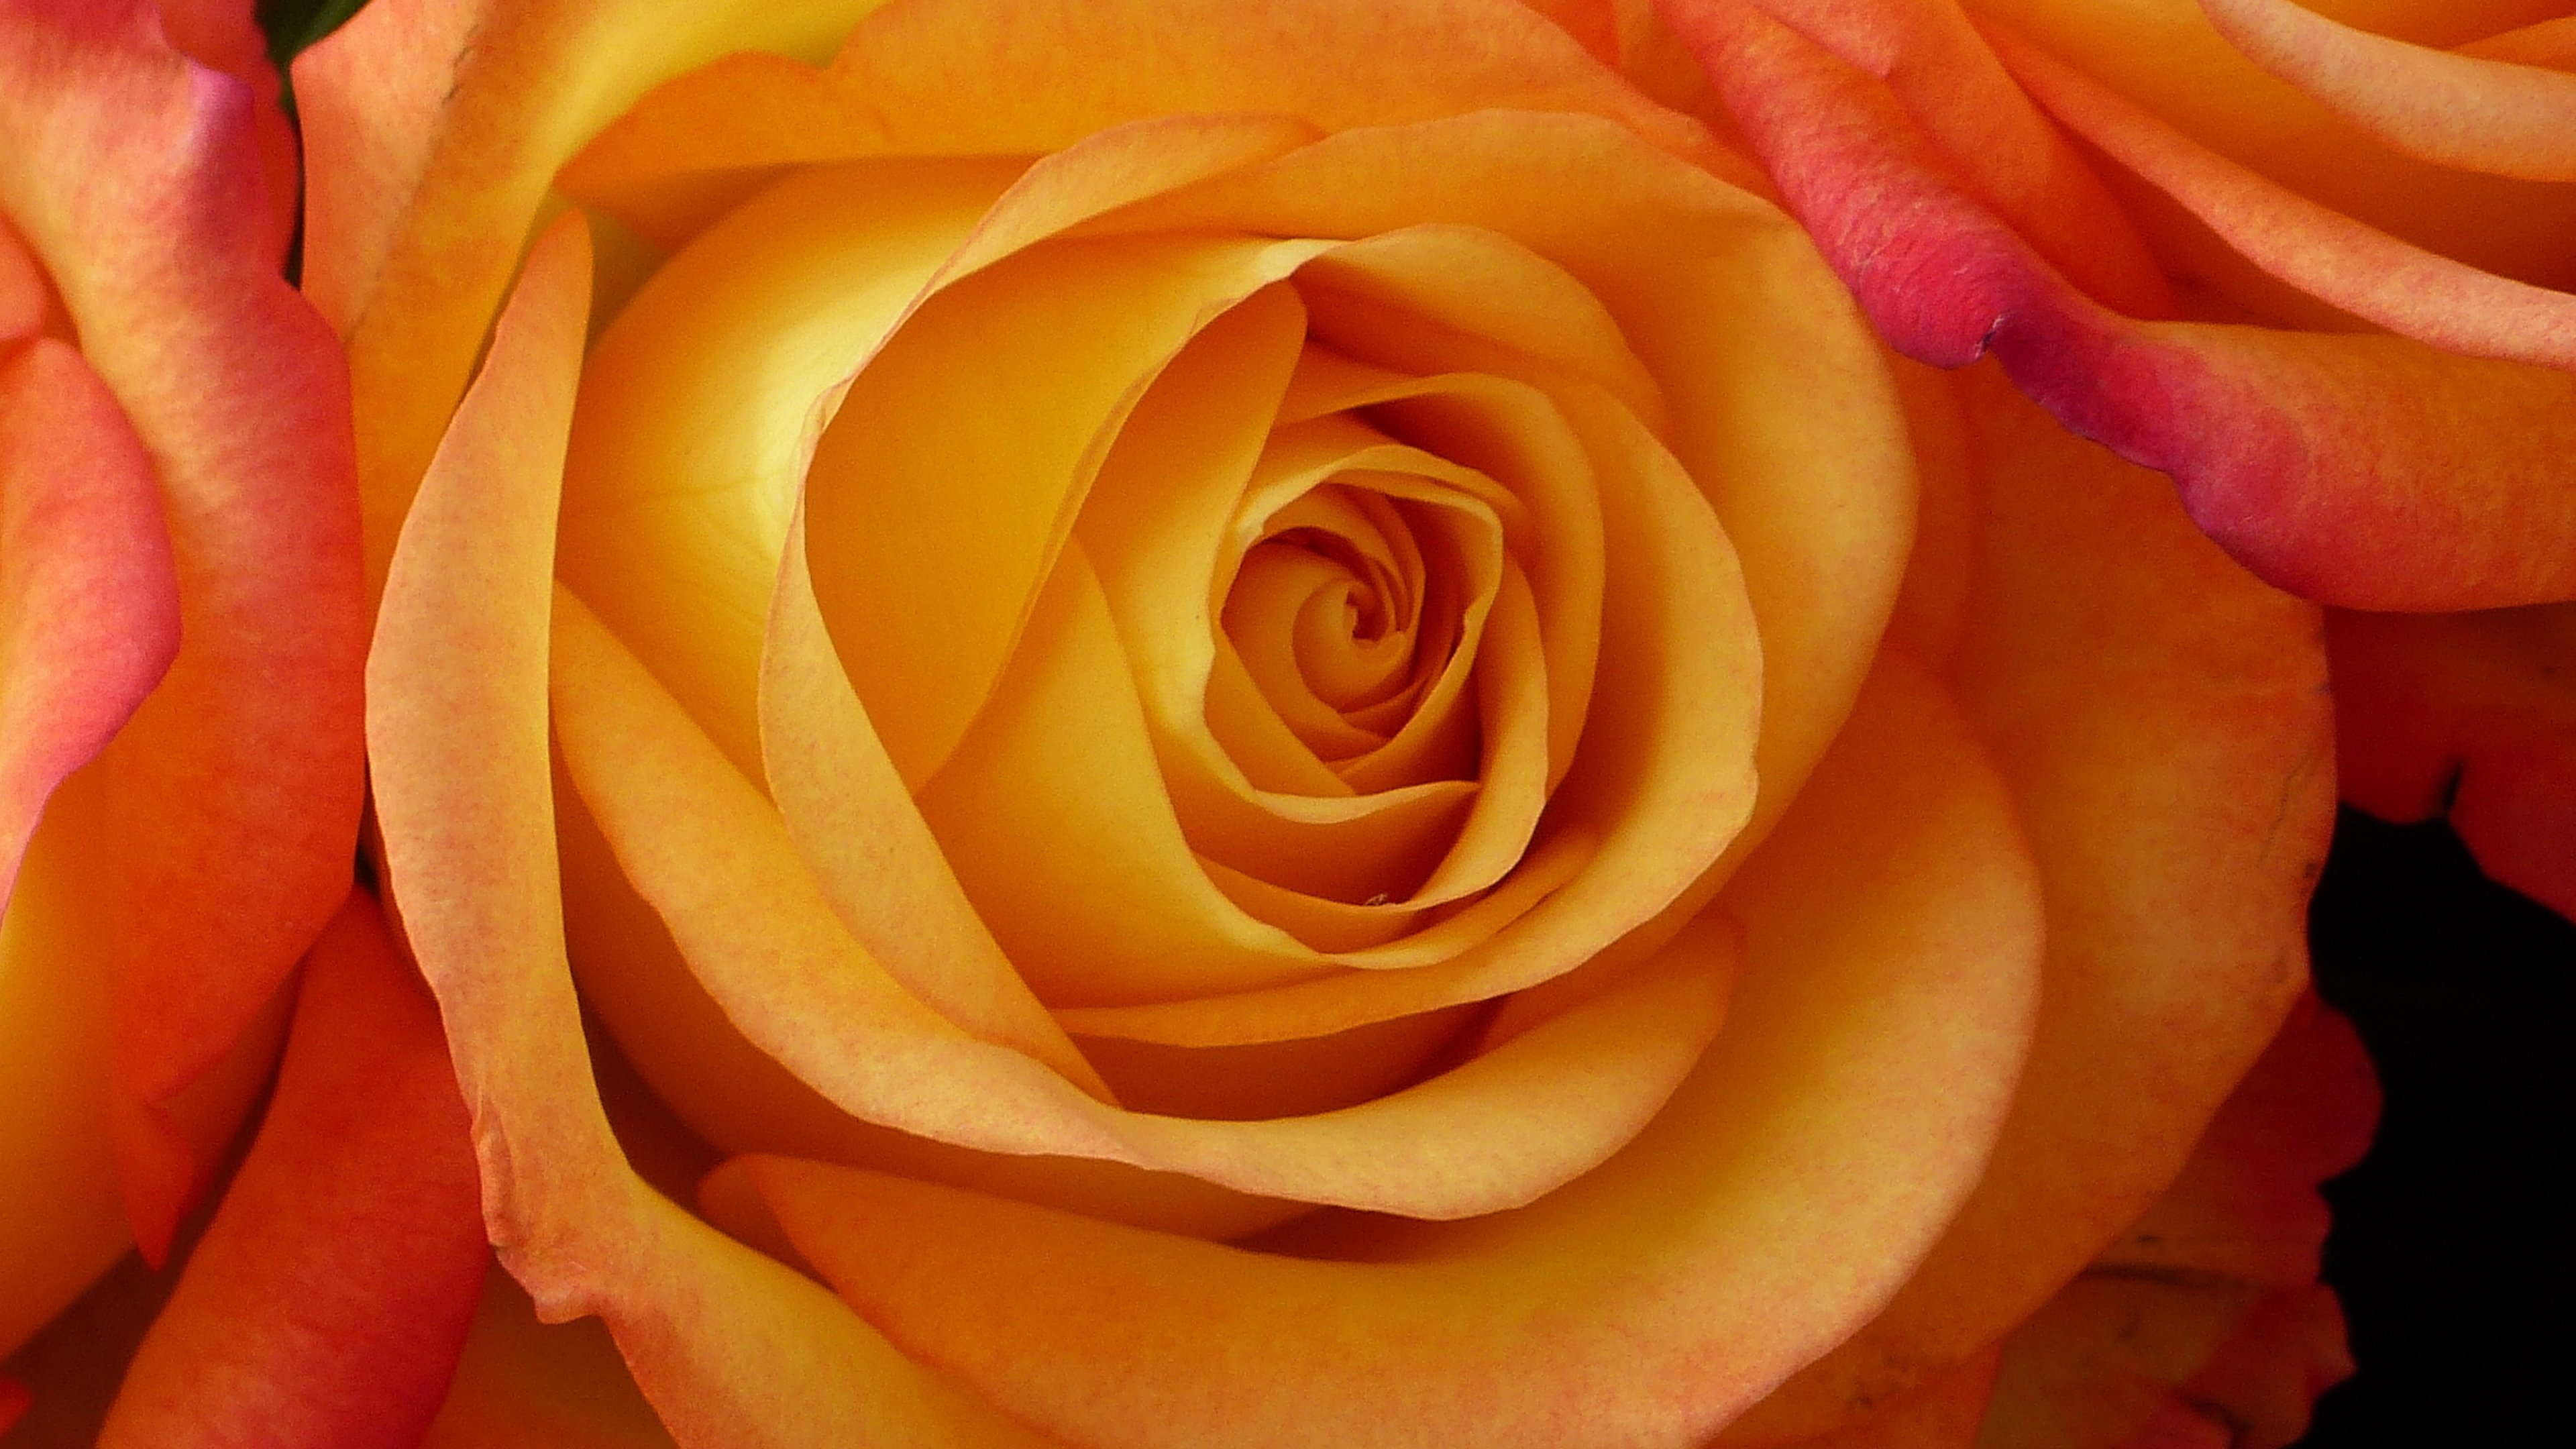 Peach Rose Wallpaper, Android & Desktop Background